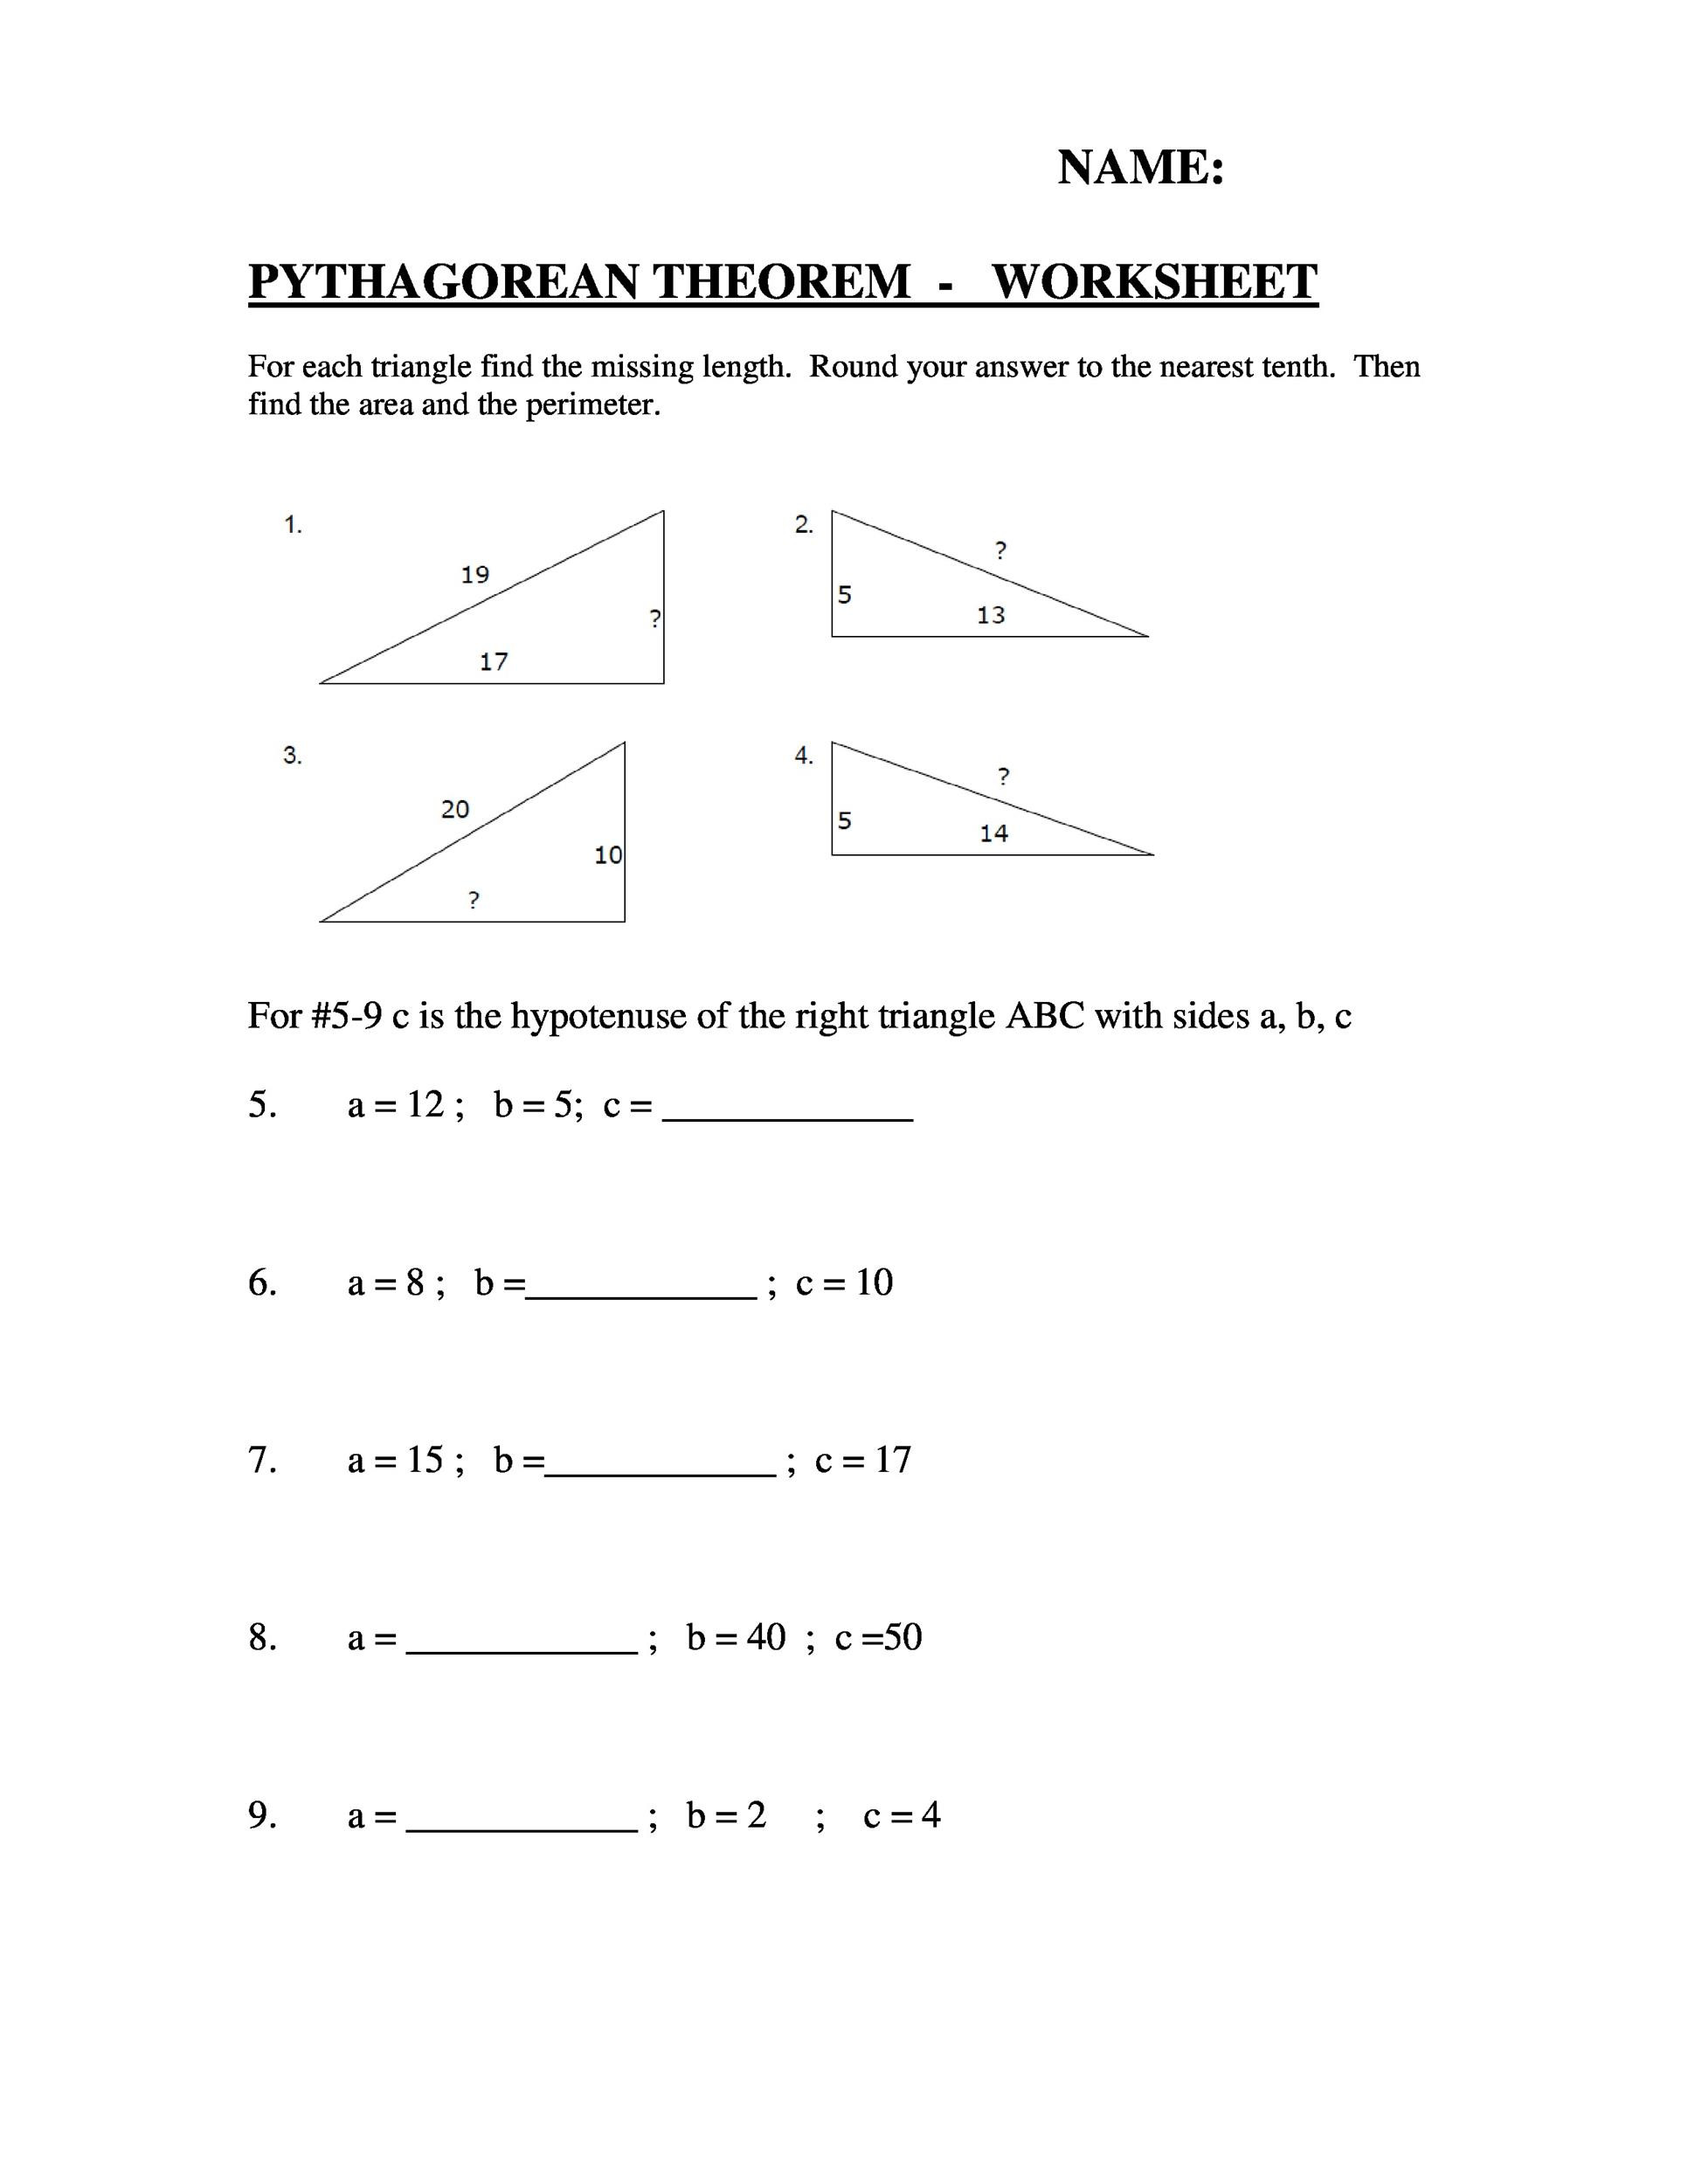 Pythagorean theorem Worksheet with Answers 48 Pythagorean theorem Worksheet with Answers [word Pdf]